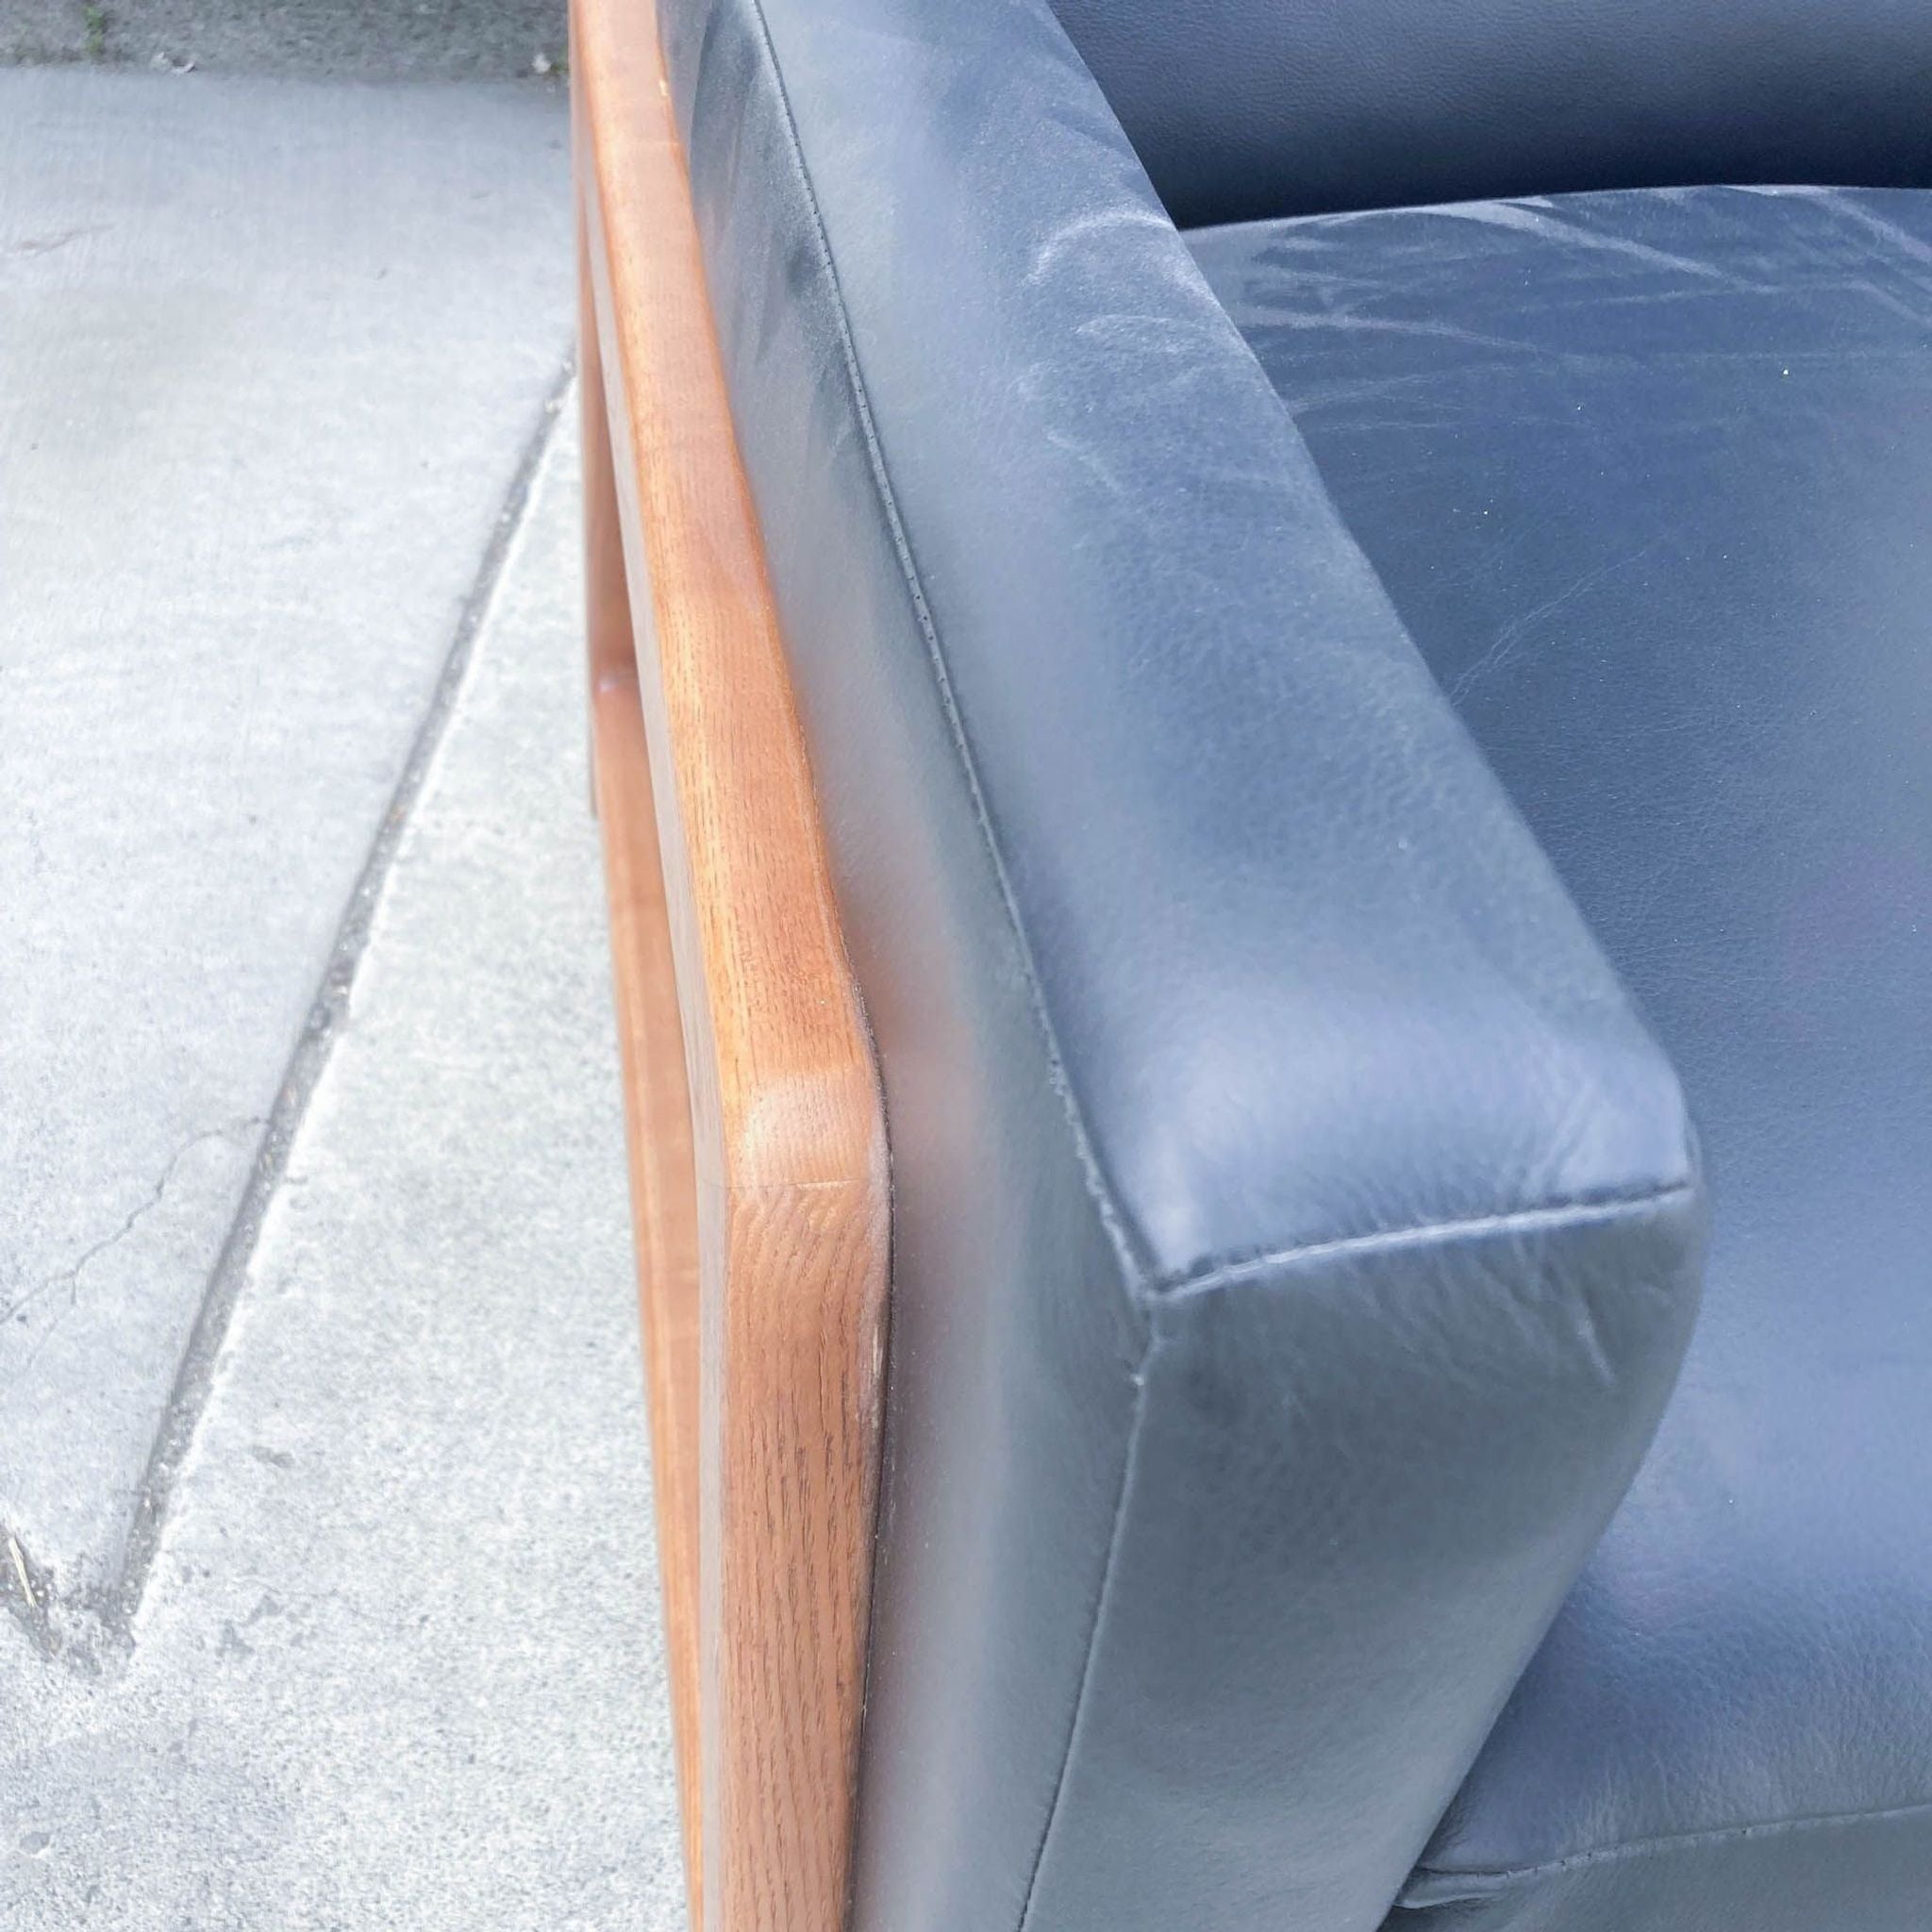 Close-up of the West Elm leather recliner showcasing the quality leather upholstery and the detailed wood frame.